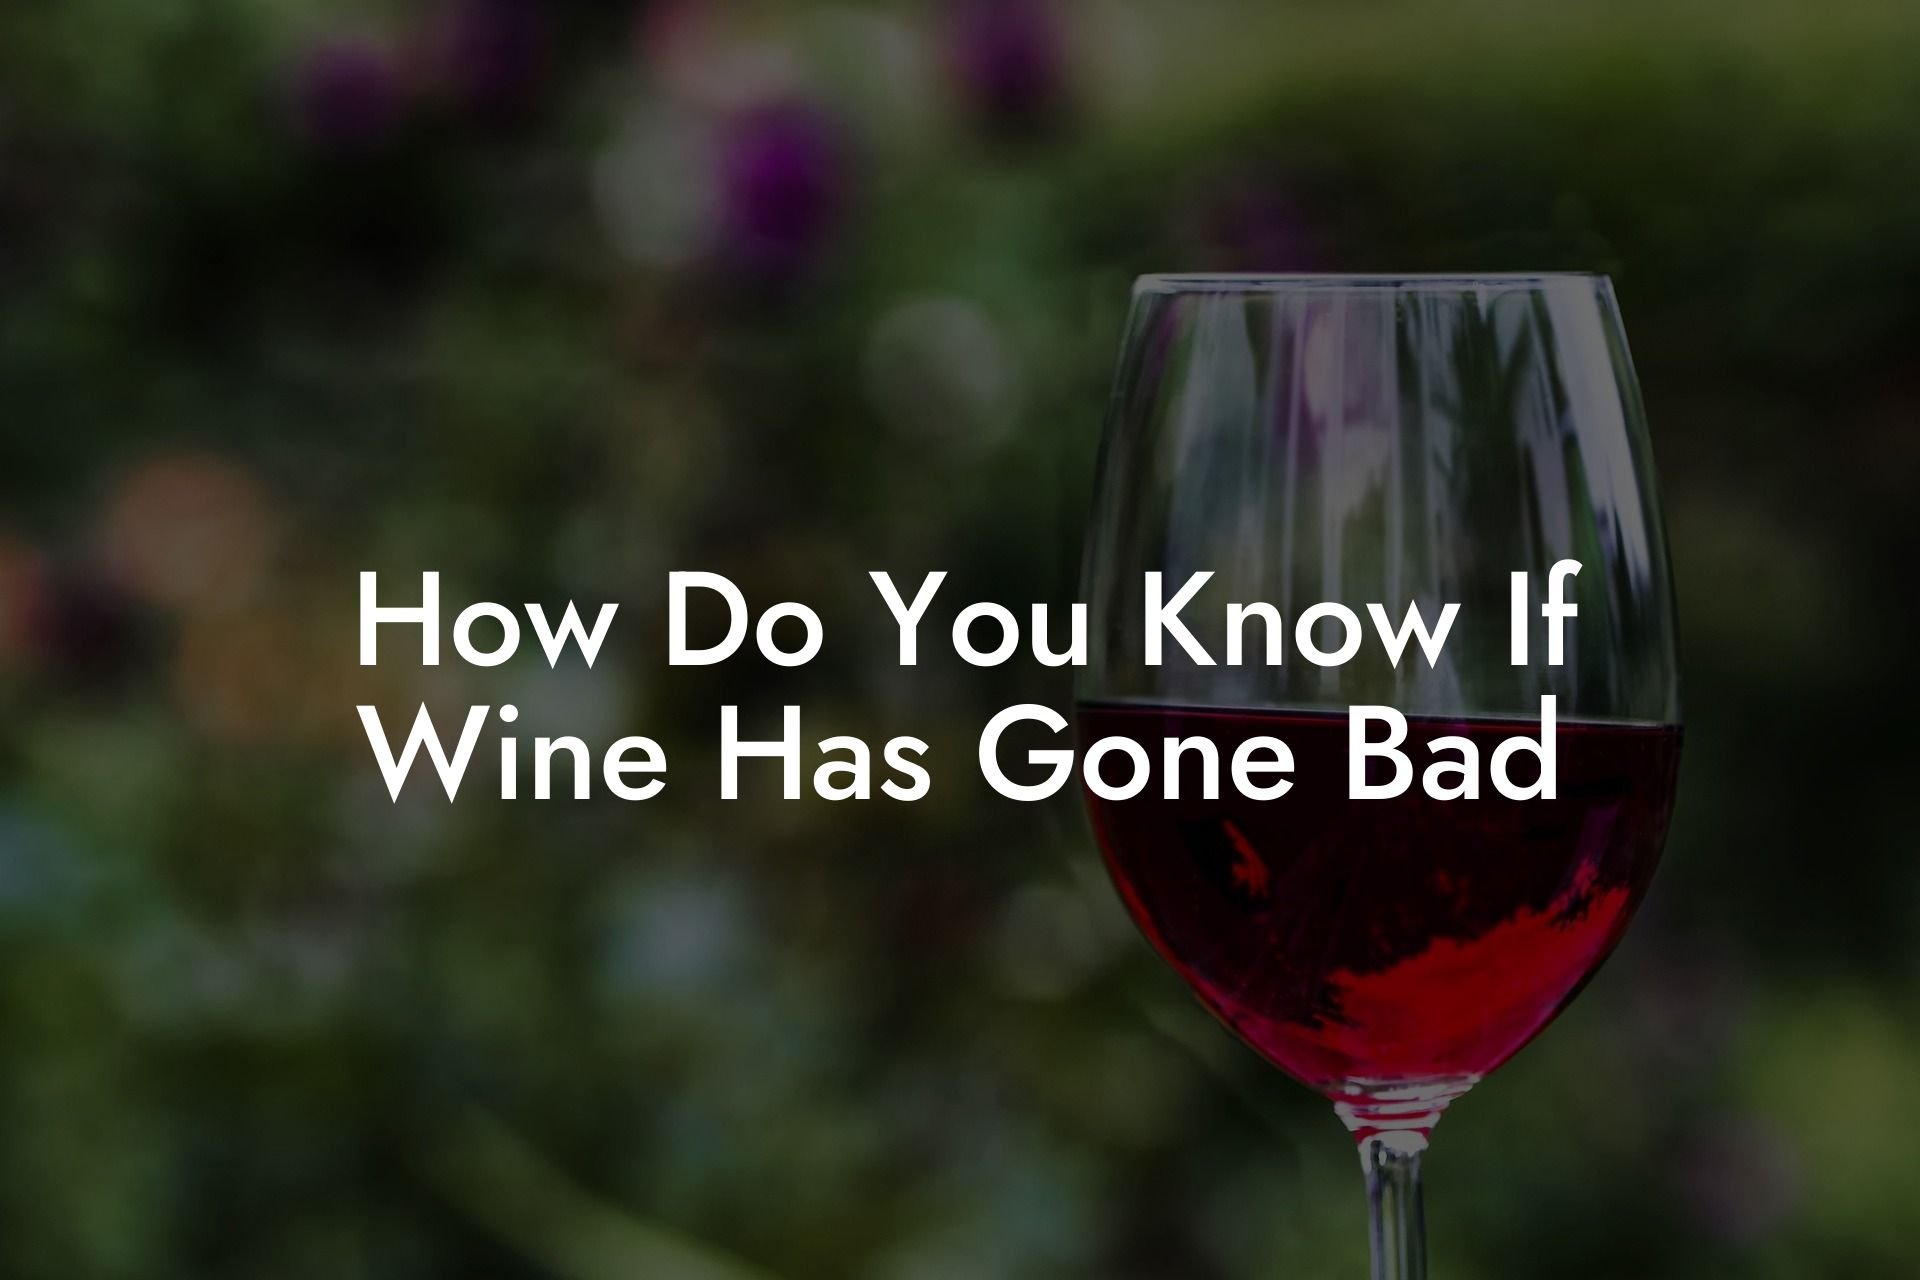 How Do You Know If Wine Has Gone Bad